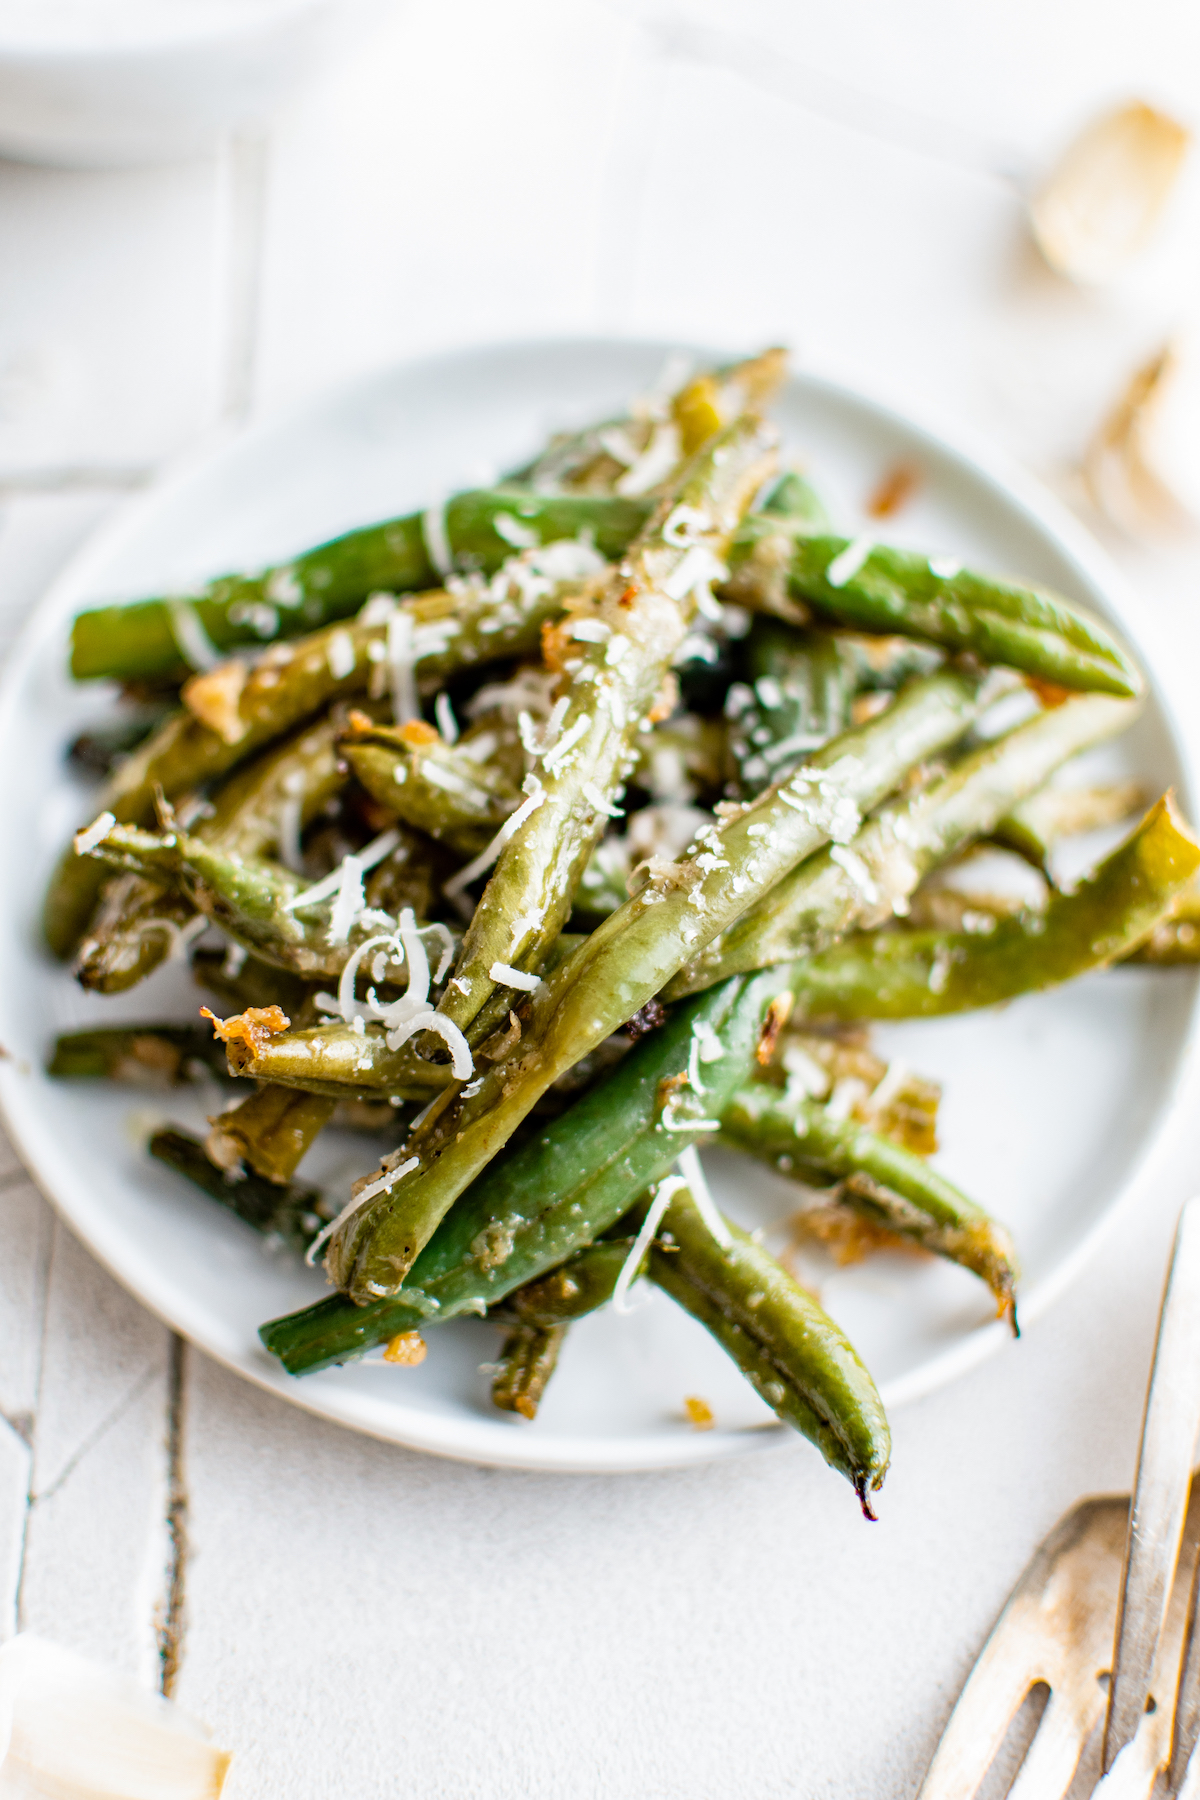 A serving of crisp, slightly golden, baked green beans on a small white plate.